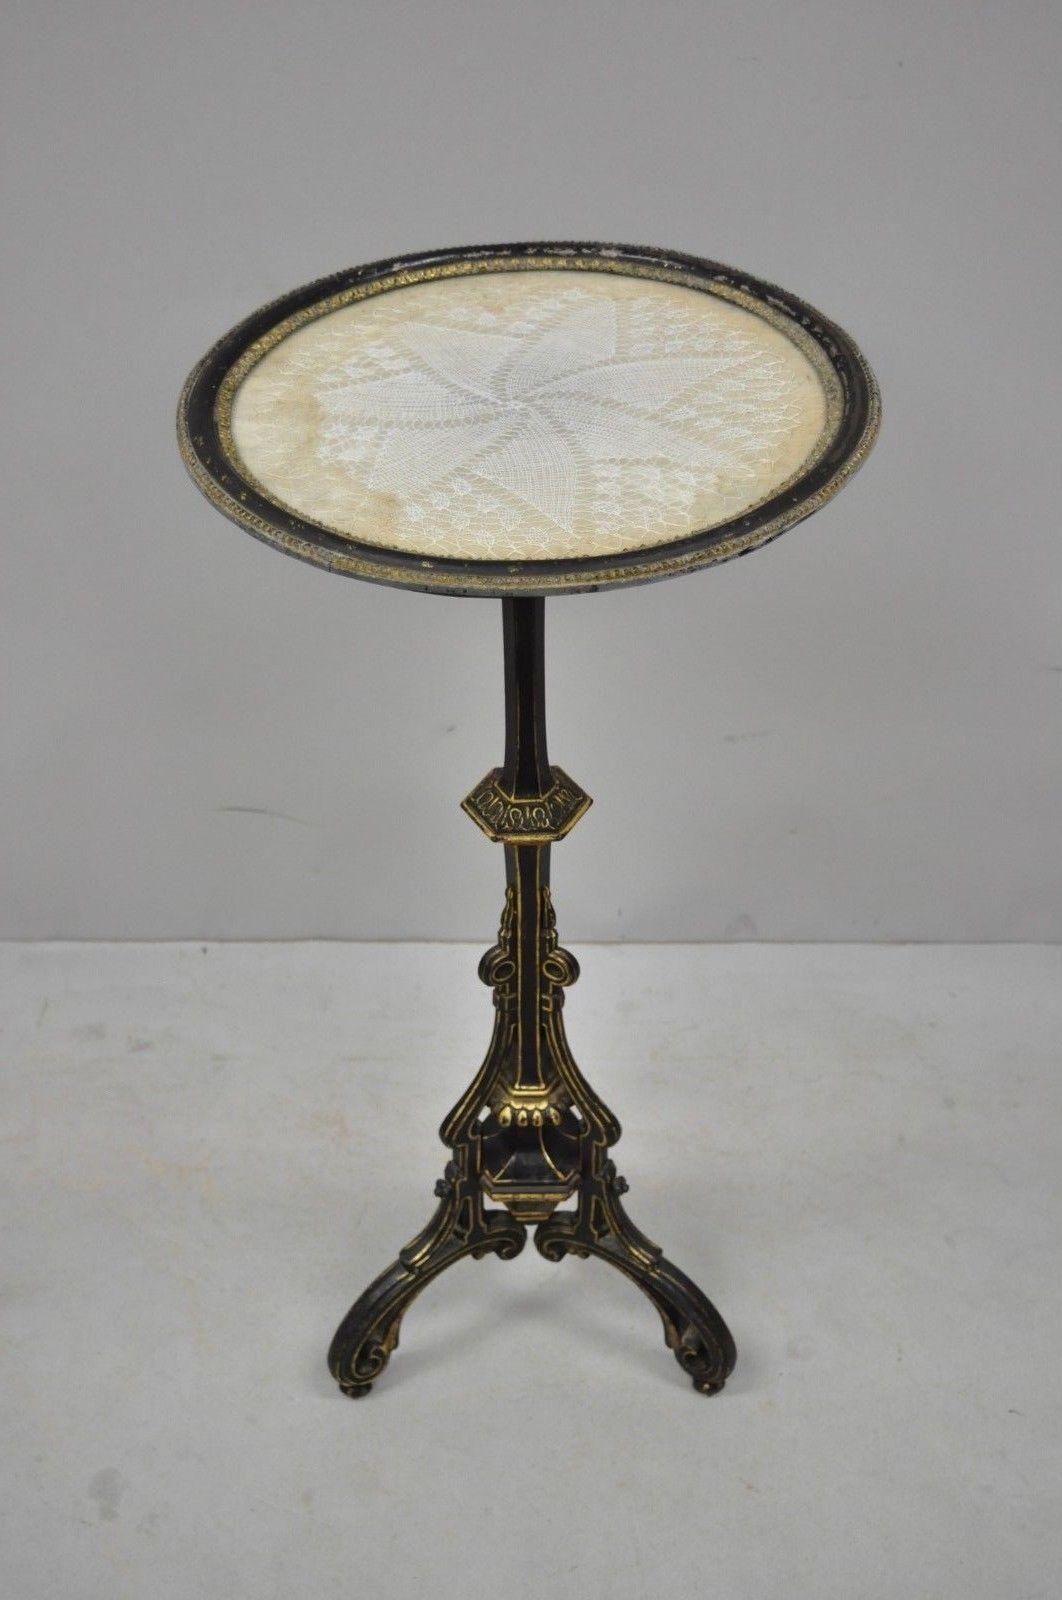 Antique cast iron French Victorian pedestal fern stand table with Lace Doily display top. Item features cast iron frame, French woven doily covered with glass display top, original black and gold finish, very unique antique item, circa 19th century.